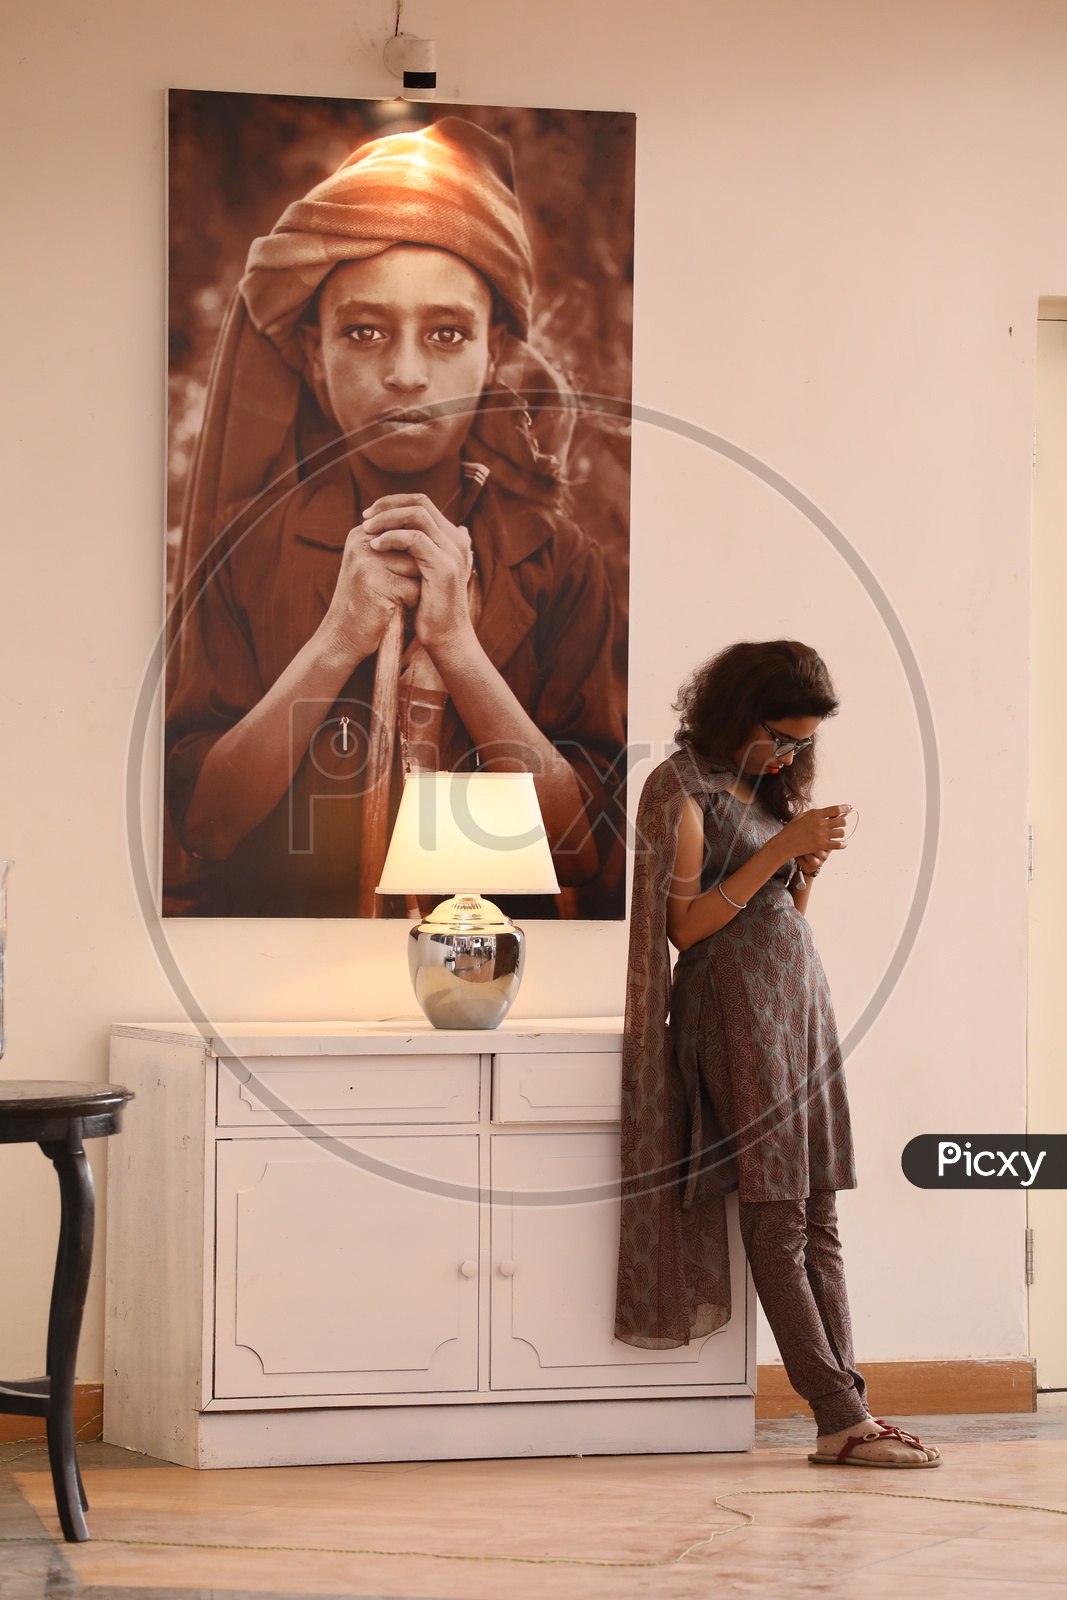 A Young Girl Using Smartphone by Standing In a  Art Gallery